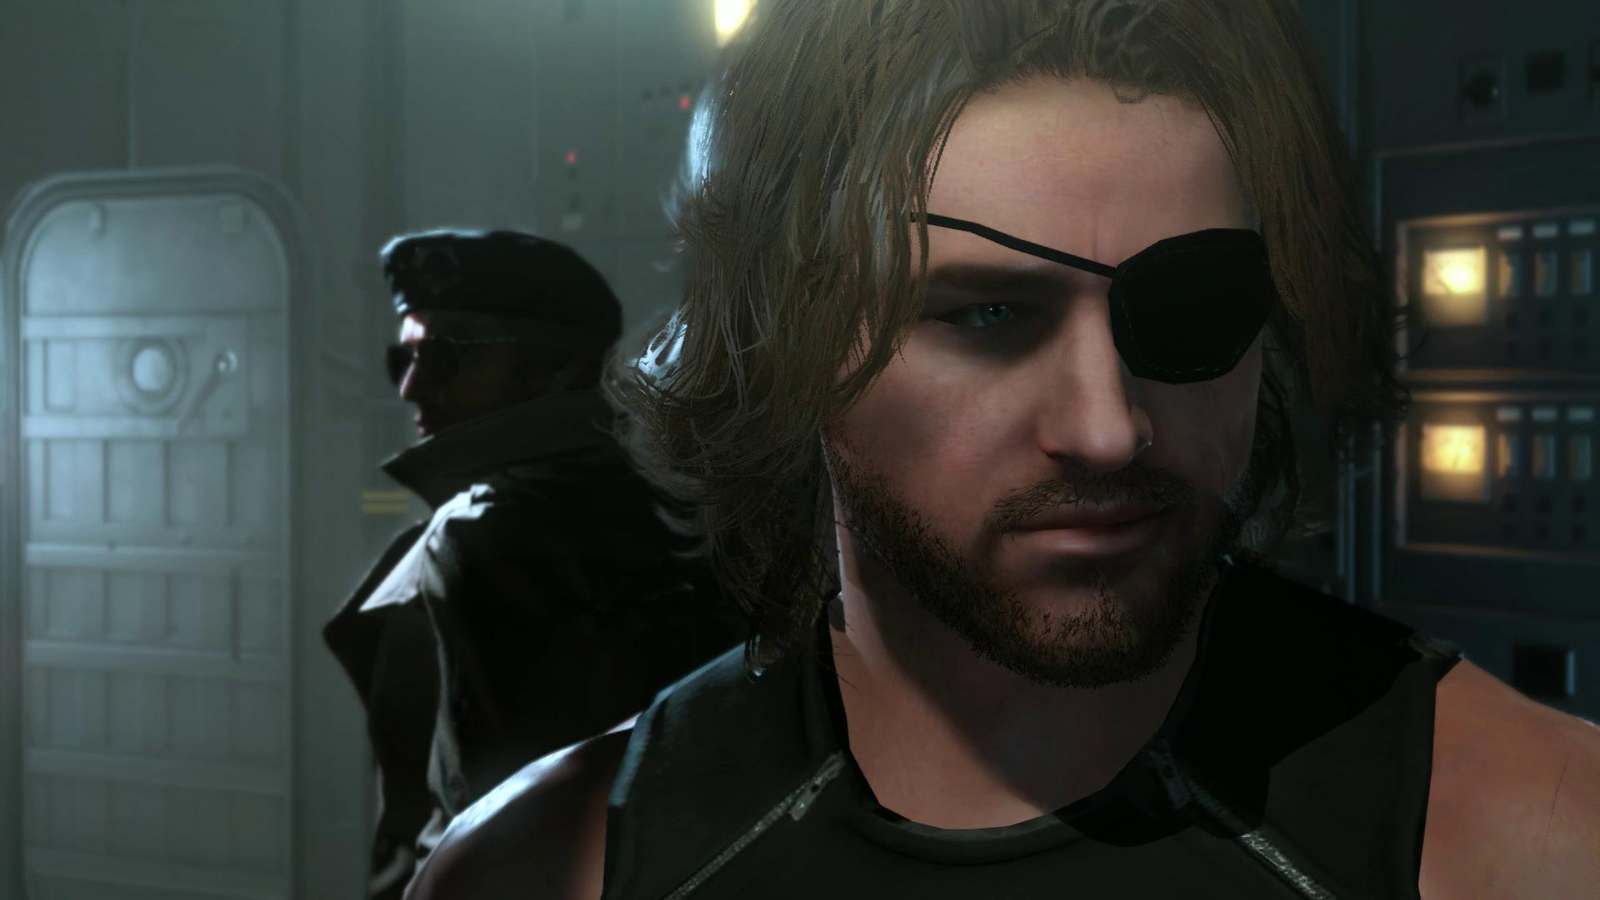 Metal Gear Solid 4 may finally escape PS3 after tiny detail spotted